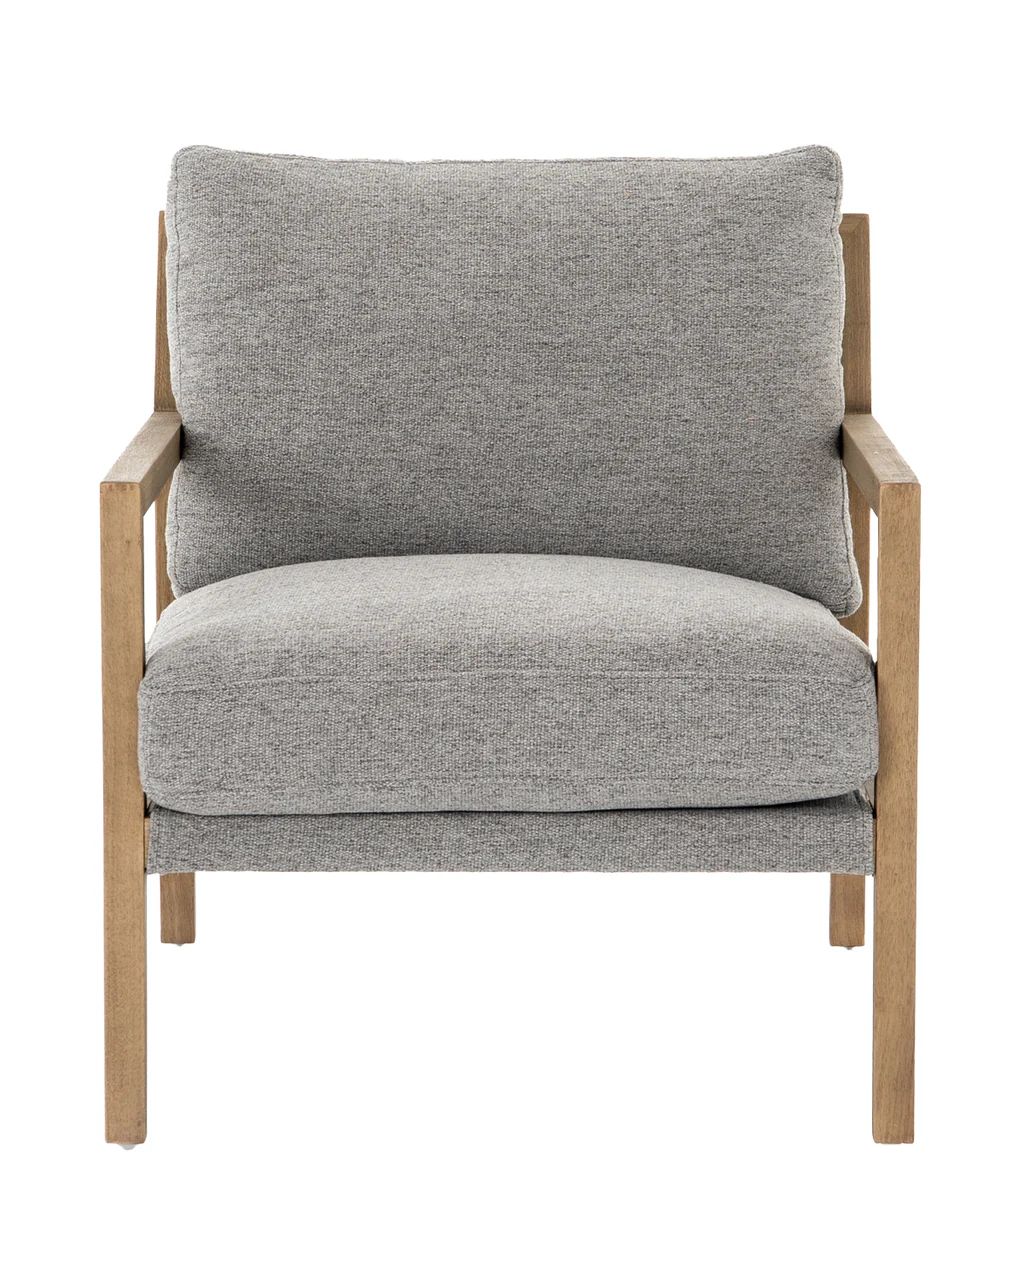 Lucy Chair | McGee & Co.